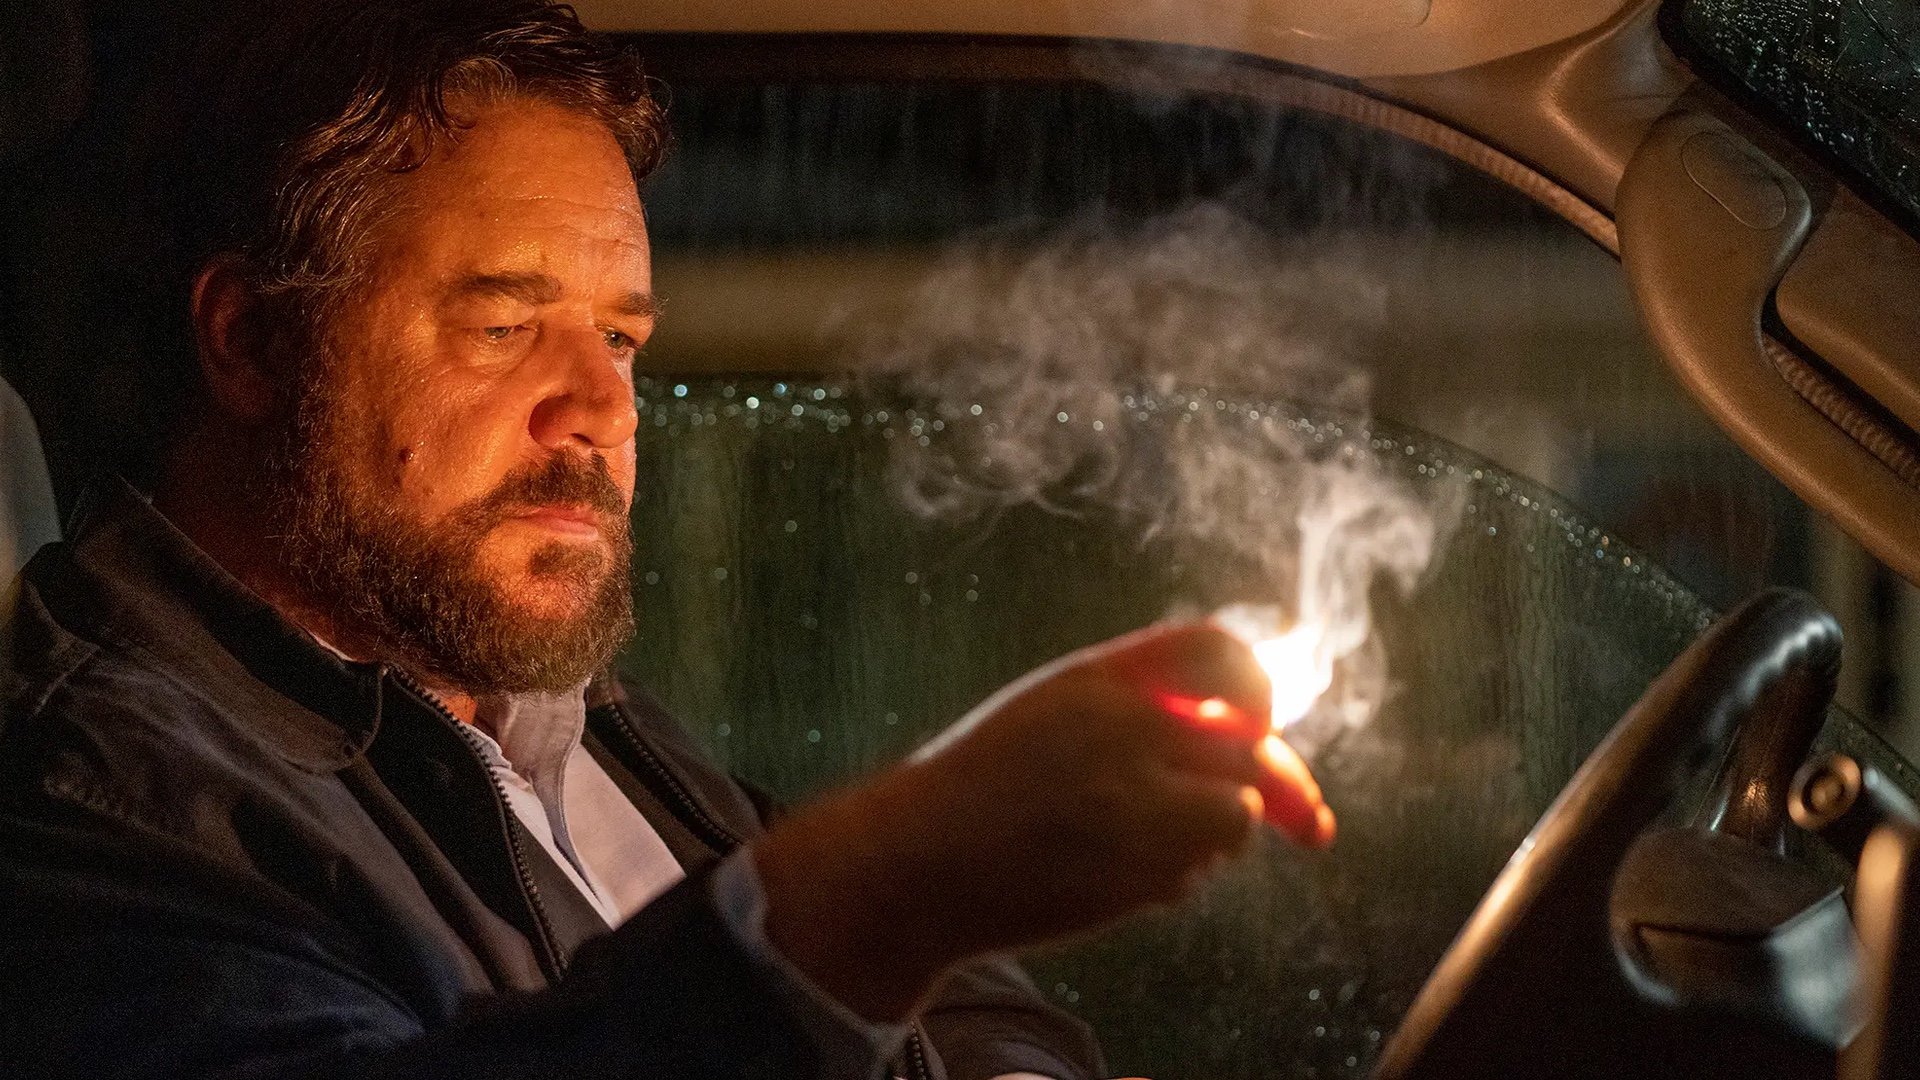 Russell Crowe Set To Star in a Supernatural Horror Thriller THE POPE'S EXORCIST